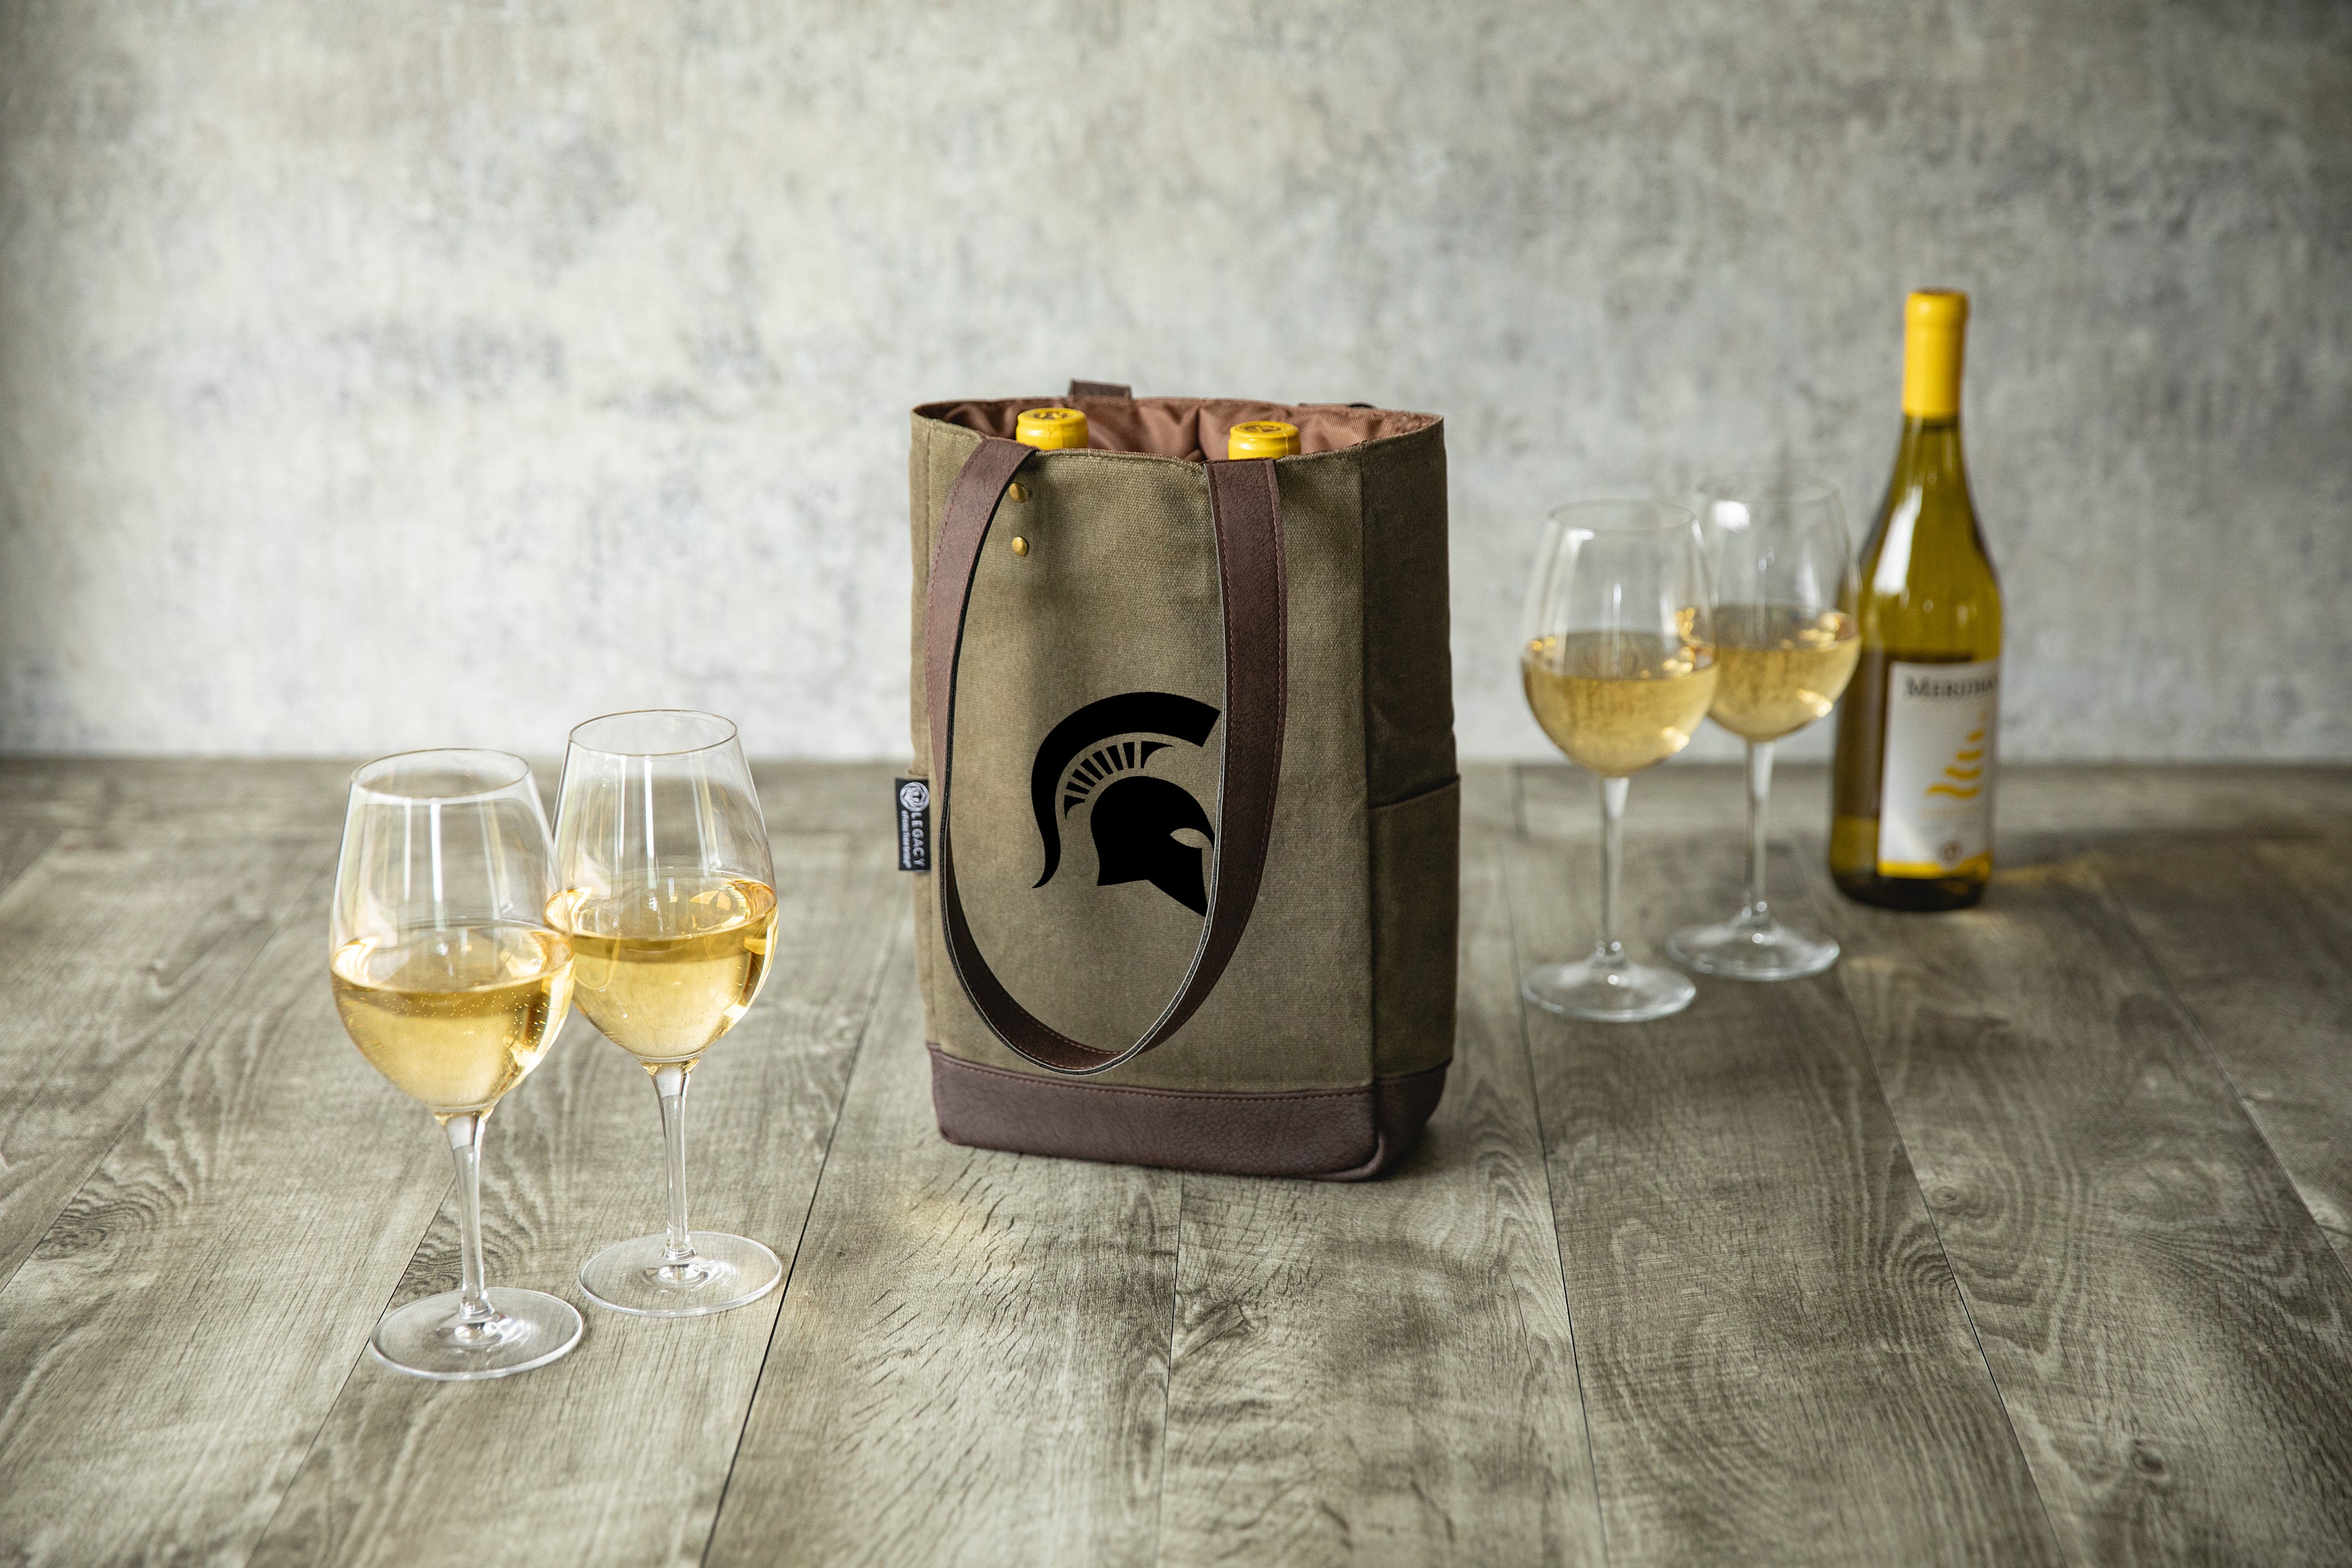 Michigan State Spartans - 2 Bottle Insulated Wine Cooler Bag